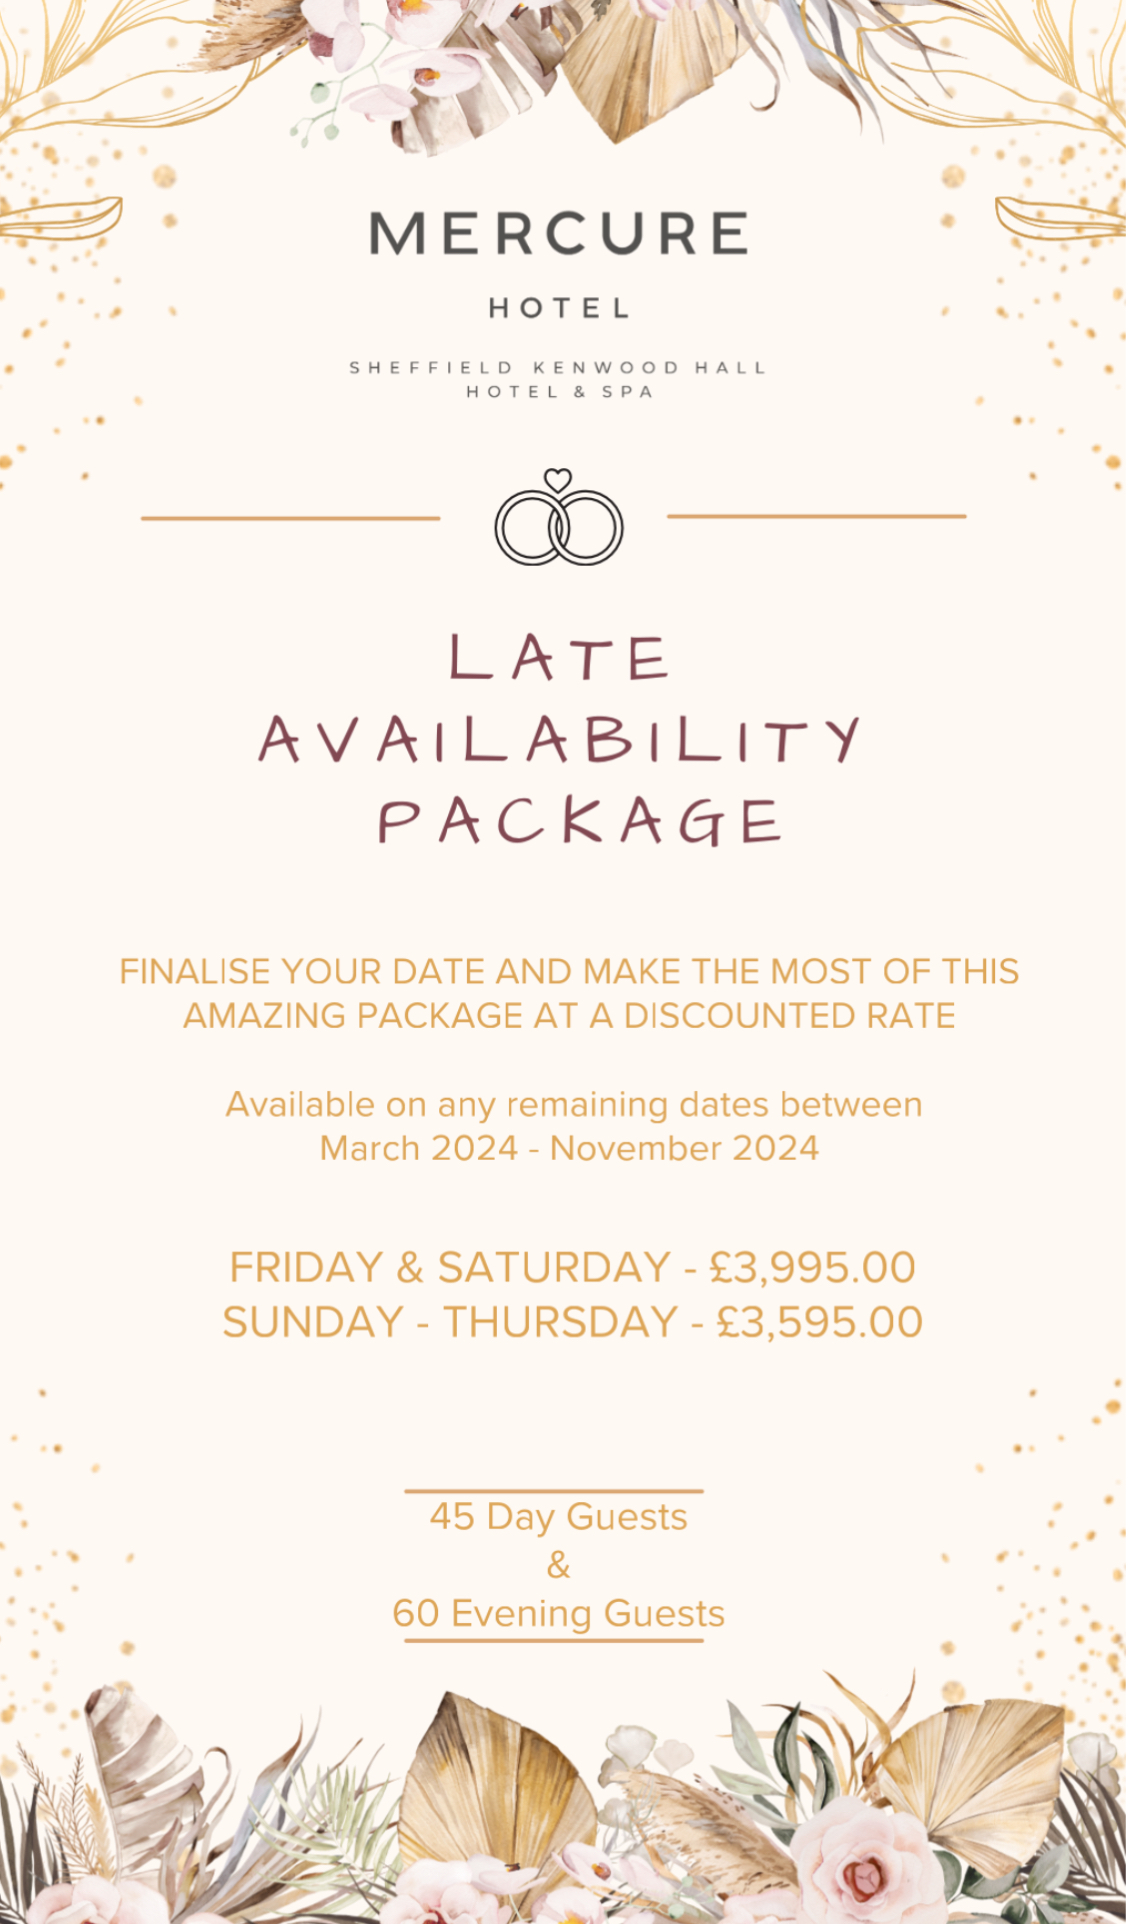 Kenwood Hall Hotel Wedding Late Availability Package 2024